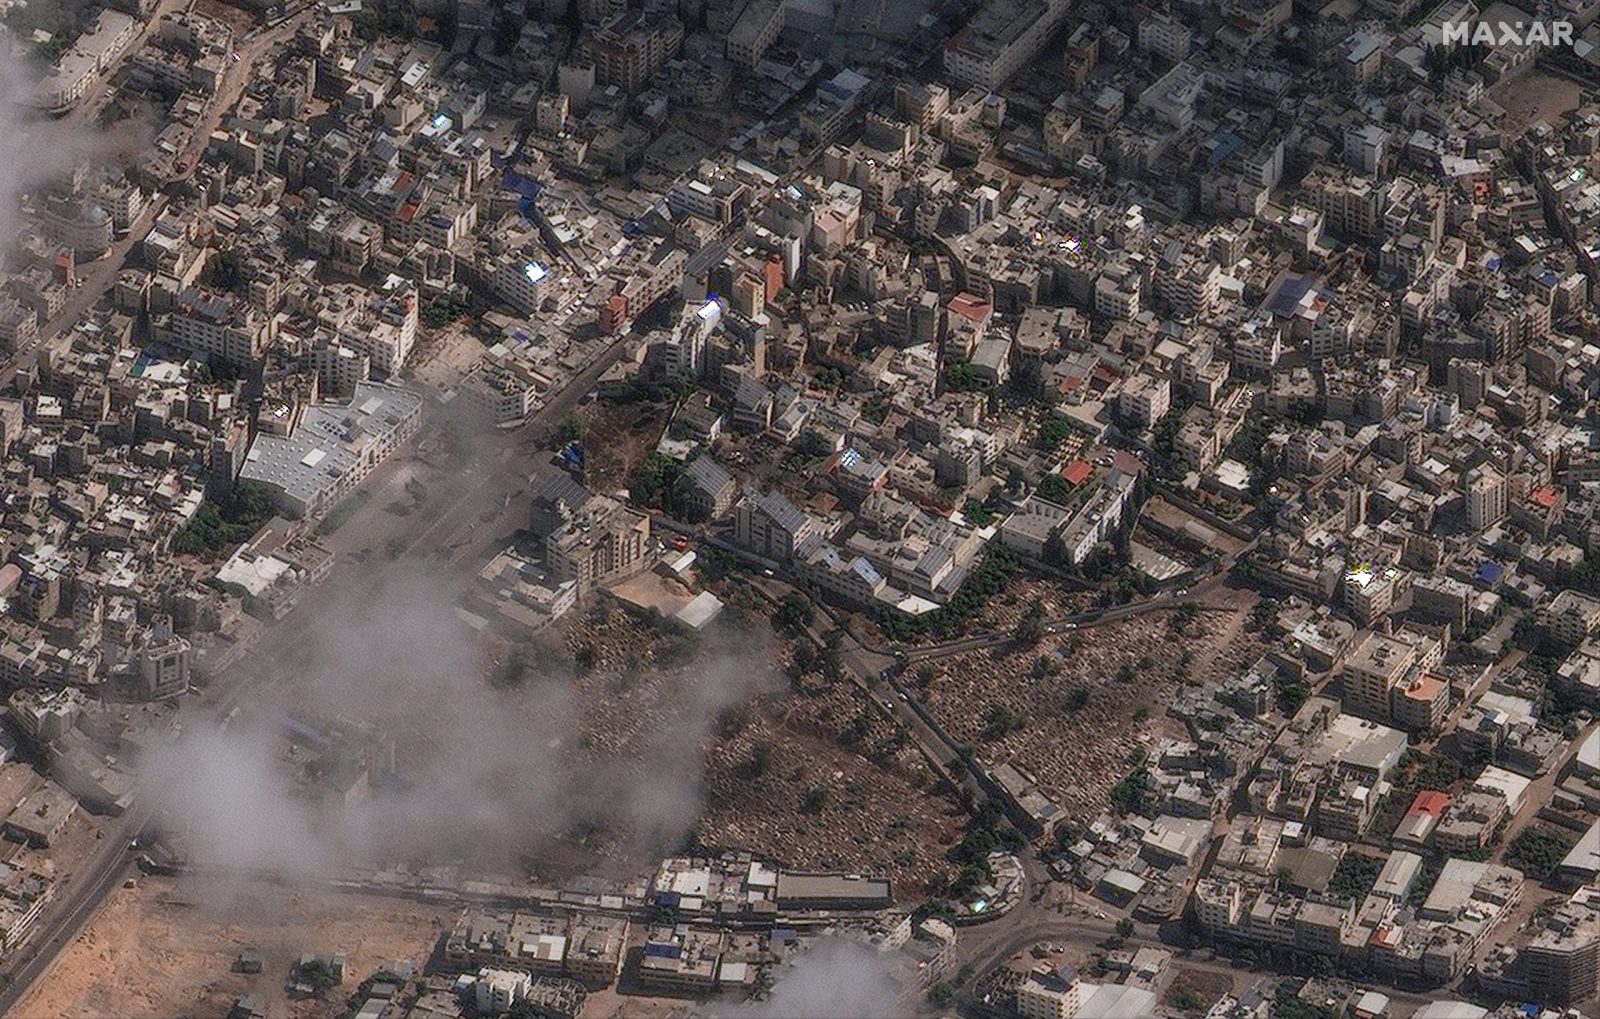 epa10925607 A handout photo made available 18 October 2023 by Maxar Technologies shows a satellite view of Al Ahli hospital after the explosion which occured one day earlier, Gaza, 18 October 2023. According to Palestinian authorities in Gaza hundreds of people have been killed in an airstrike to the hospital in Gaza on 17 October. Israel on 18 October, has denied responsibility and said a Palestinan Islamic Jihad rocket misfire caused the blast. More than 3,000 Palestinians and 1,400 Israelis have been killed according to the Israel Defense Forces (IDF) and the Palestinian Health authority since Hamas militants launched an attack against Israel from the Gaza Strip on 07 October. Israel has warned all citizens of the Gaza Strip to move to the south ahead of an expected invasion.  EPA/MAXAR TECHNOLOGIES Satellite image ©2023 Maxar Technologies  HANDOUT EDITORIAL USE ONLY/NO SALES HANDOUT EDITORIAL USE ONLY/NO SALES